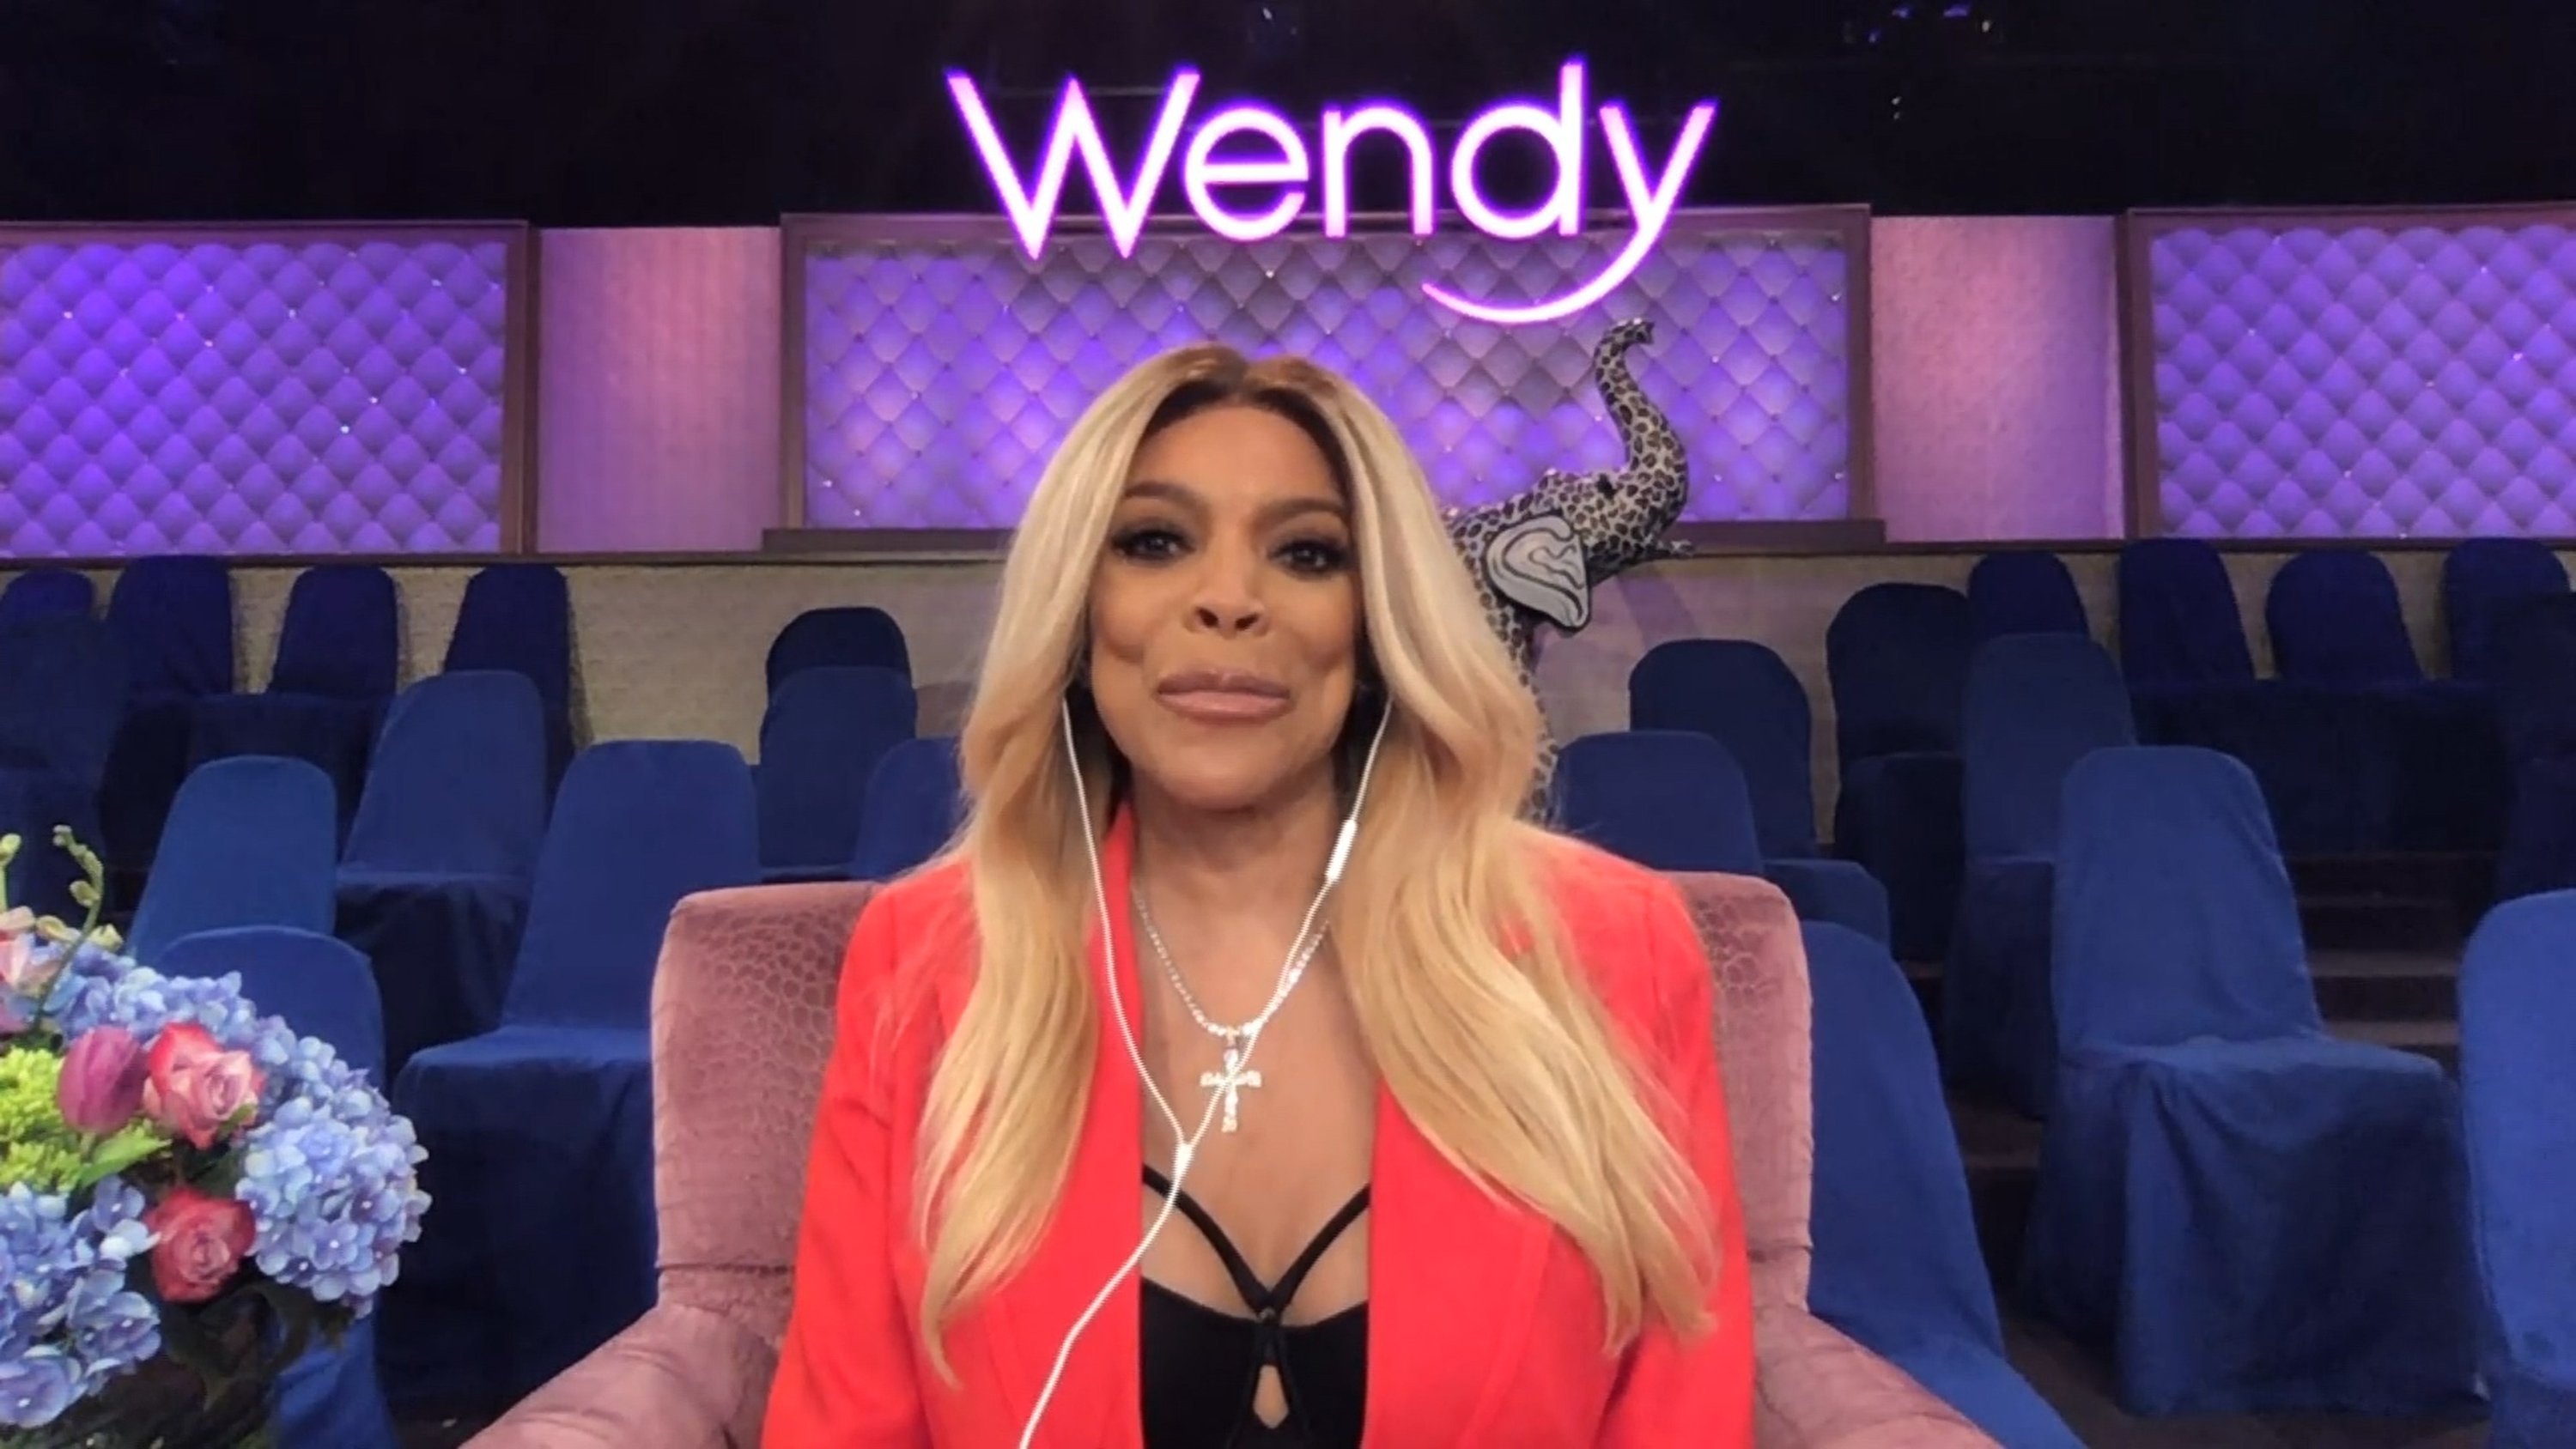 Wendy Williams on the set of her talk show